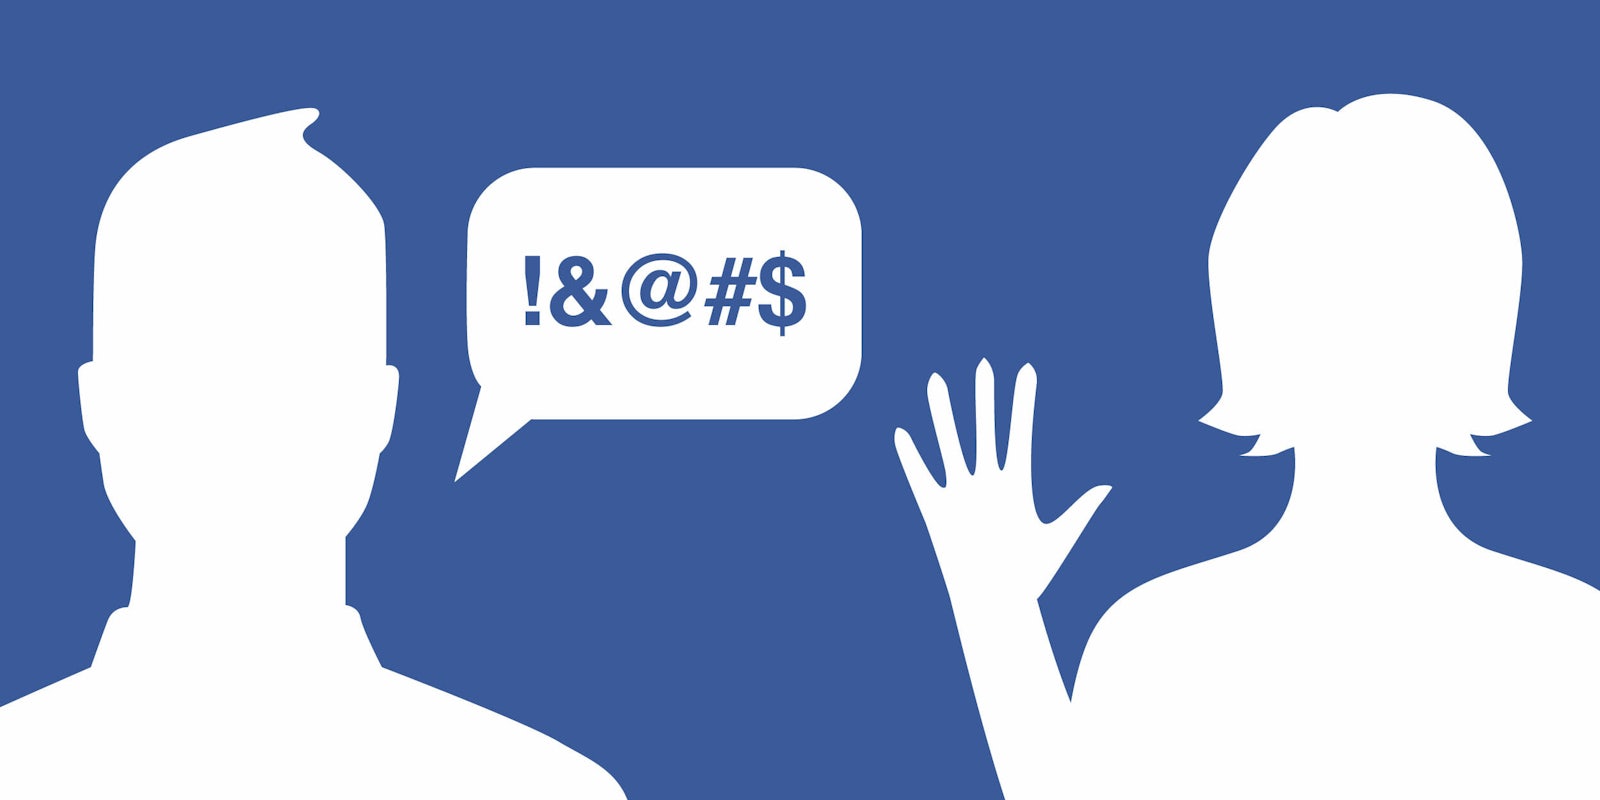 Vector illustration of a Facebook icon of a masculine person with a speech bubble filled with profanity, next to a Facebook icon of a feminine person.